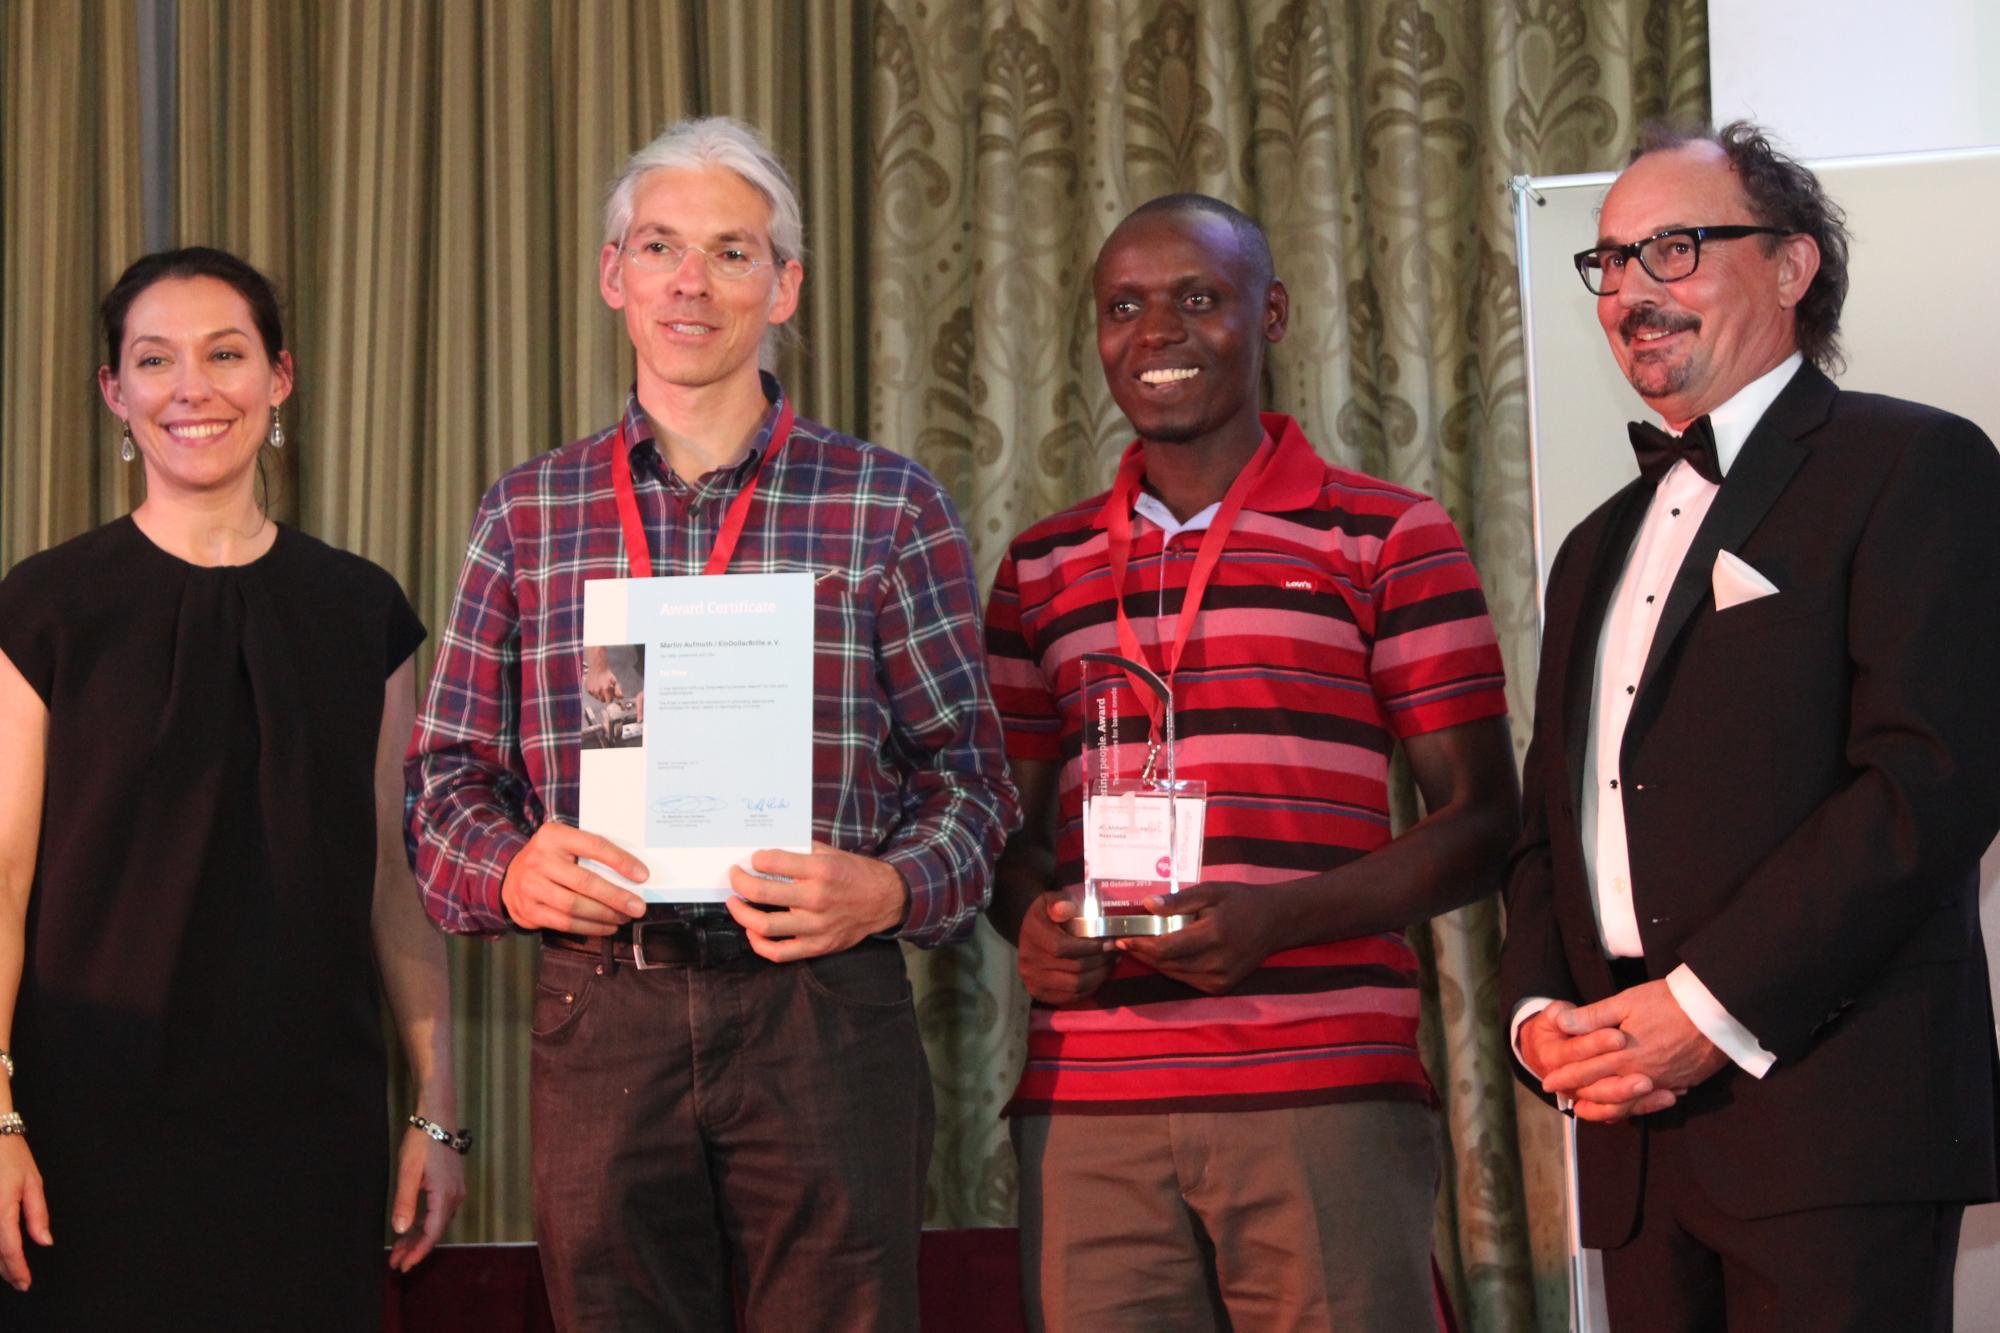 Martin Aufmuth in Kenya at the award ceremony